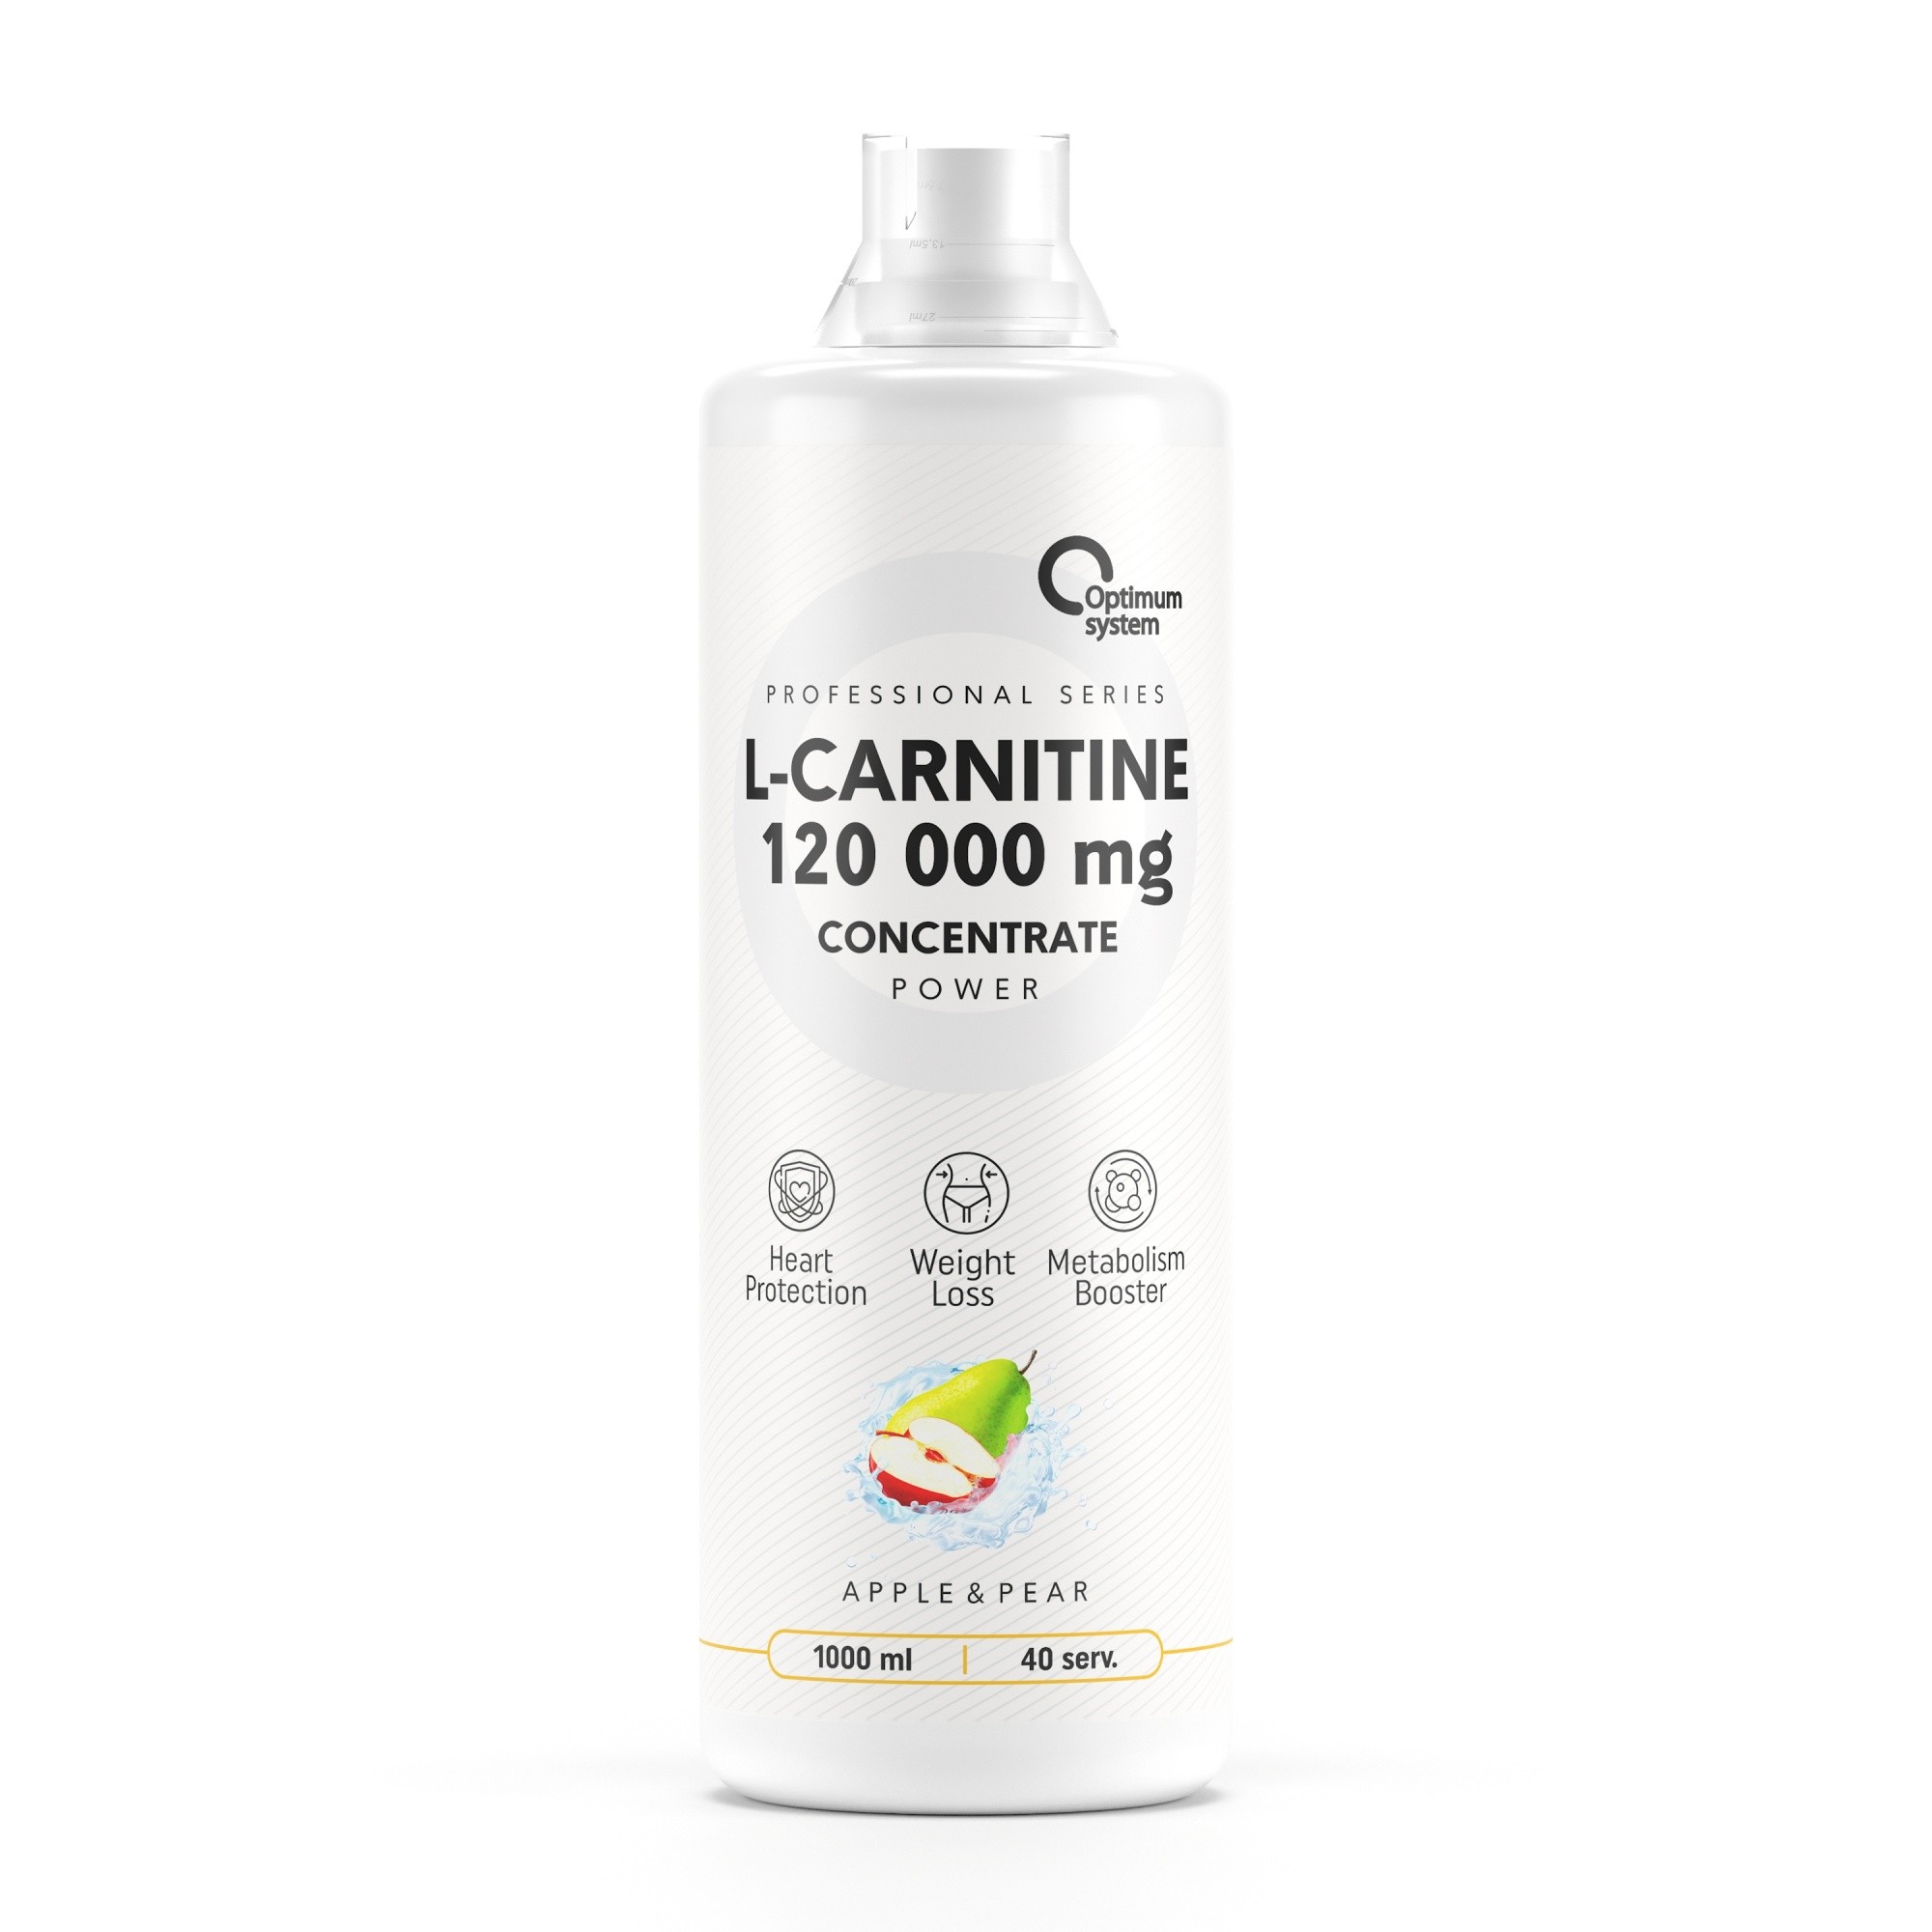 Optimum System Optimum System L-Carnitine Concentrate 120000 mg POWER, 1000 мл 